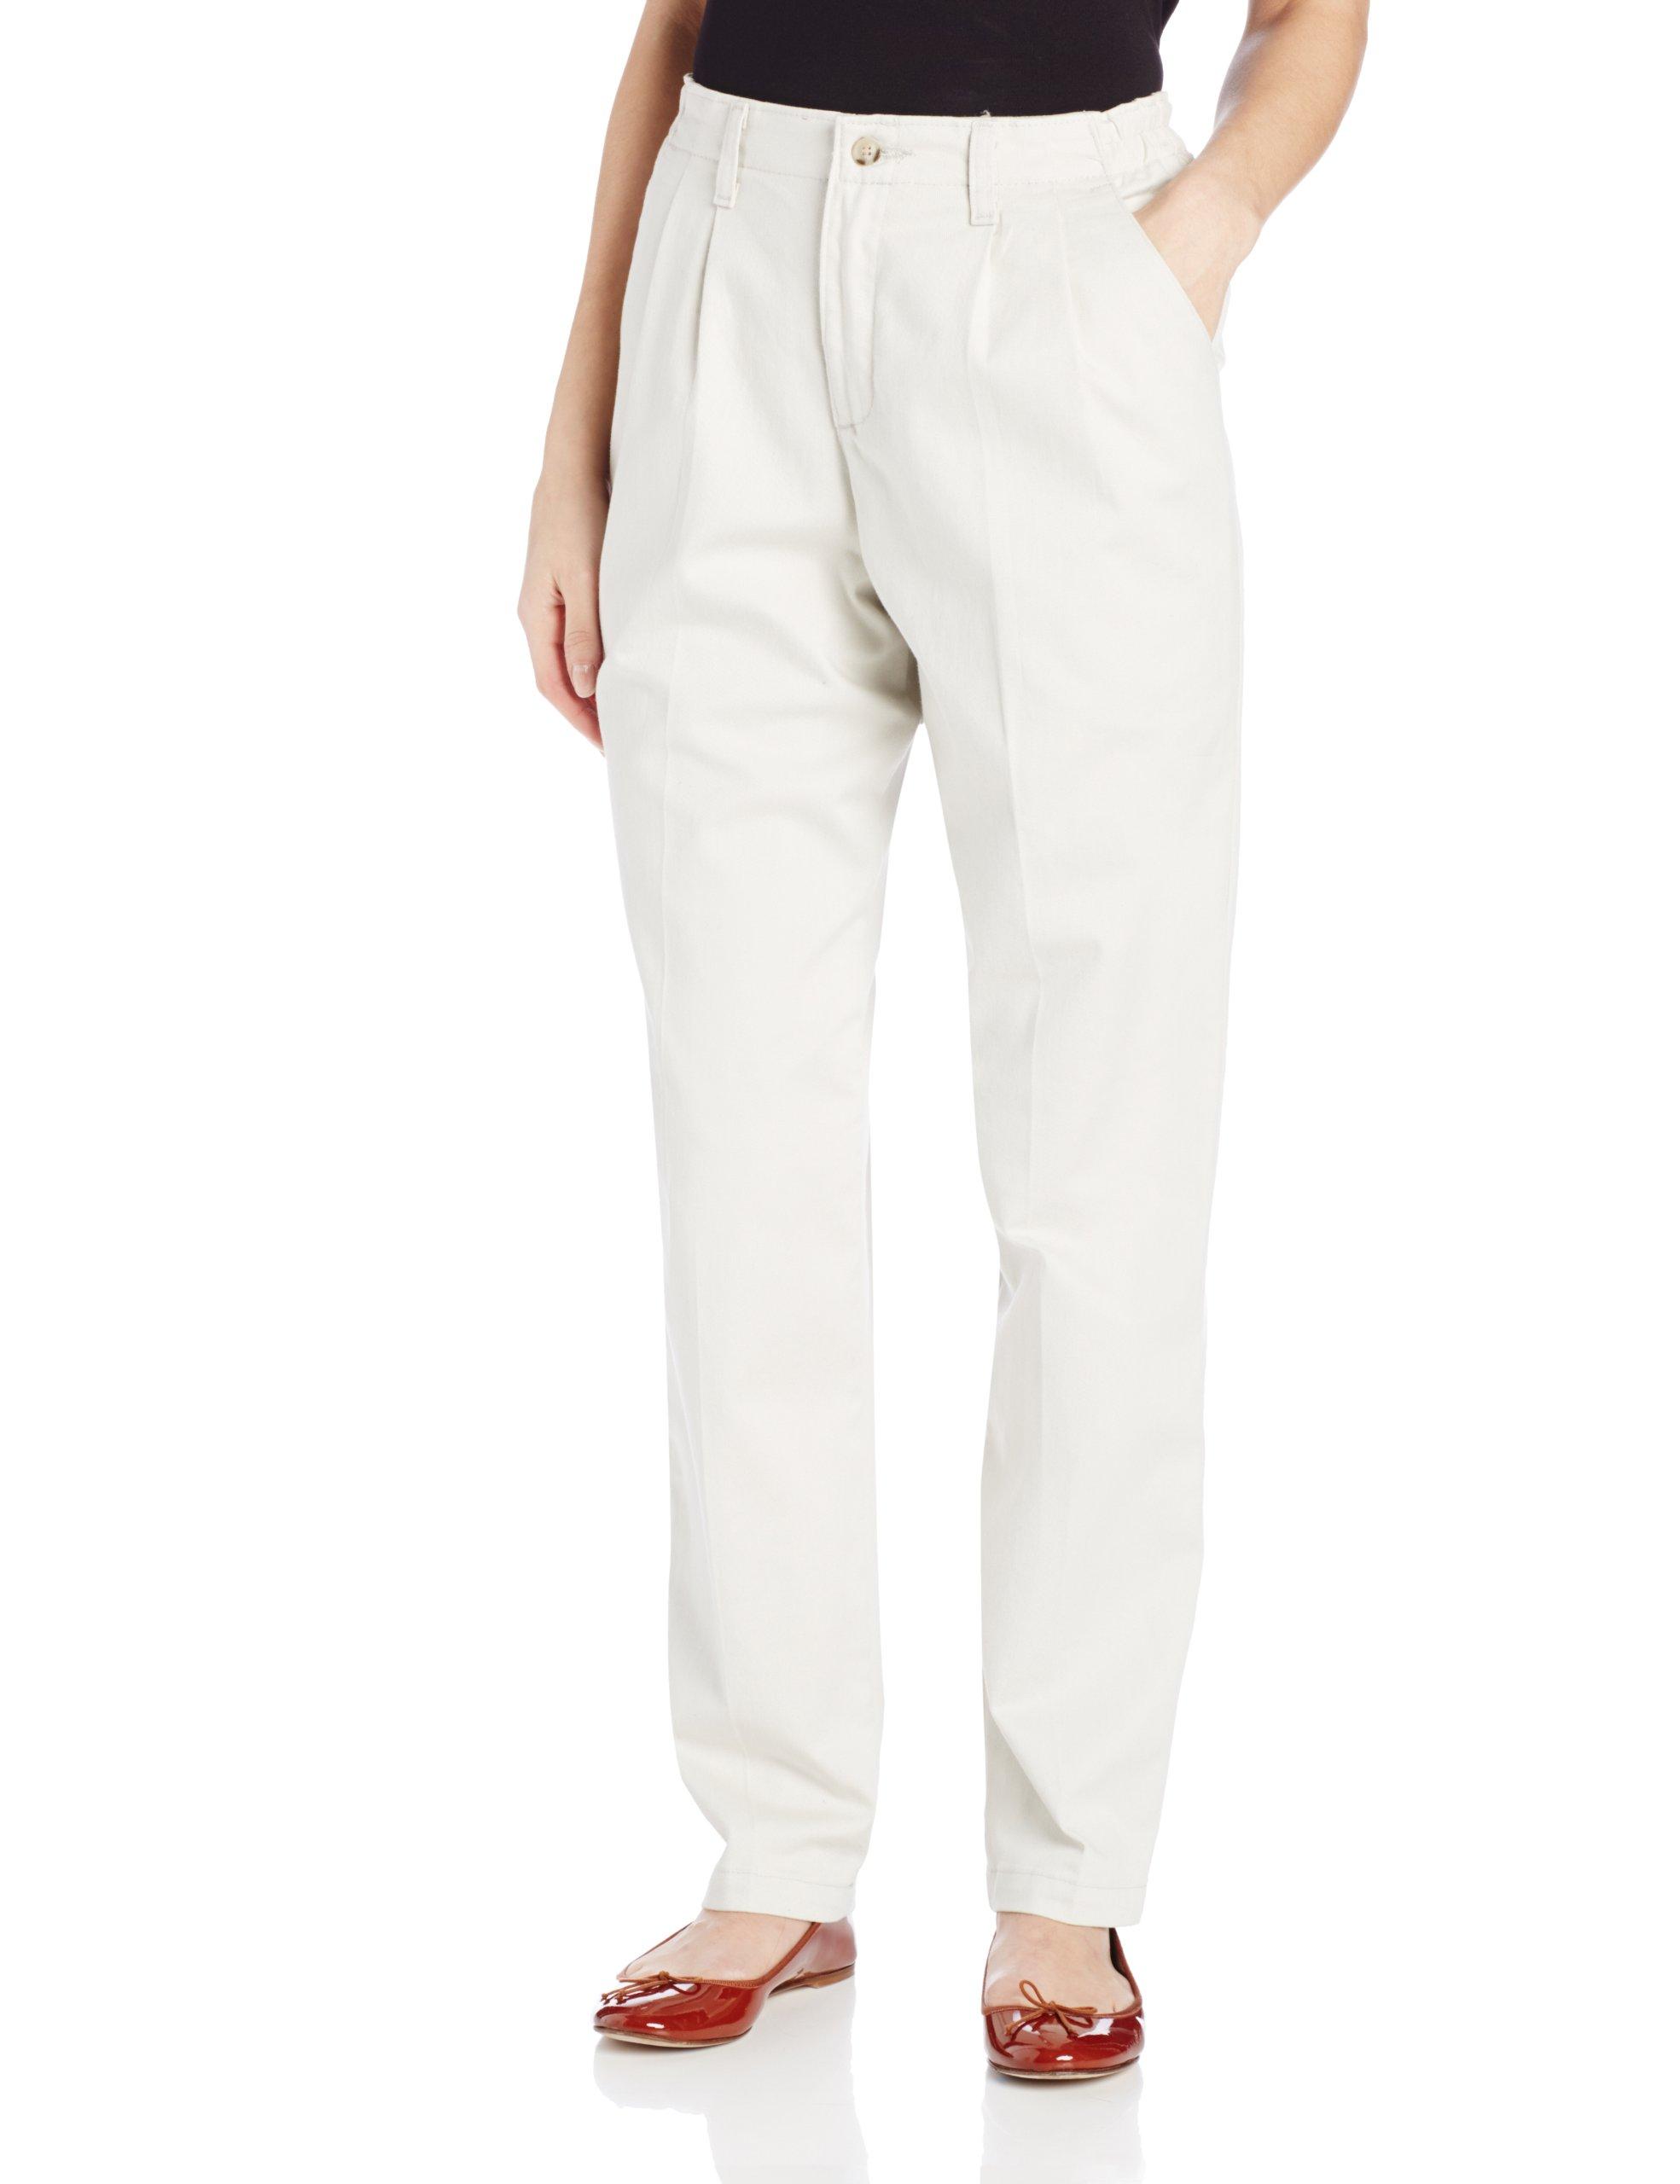 Lee Jeans Petite Relaxed Fit Side Elastic Pleated Pant in White - Save ...